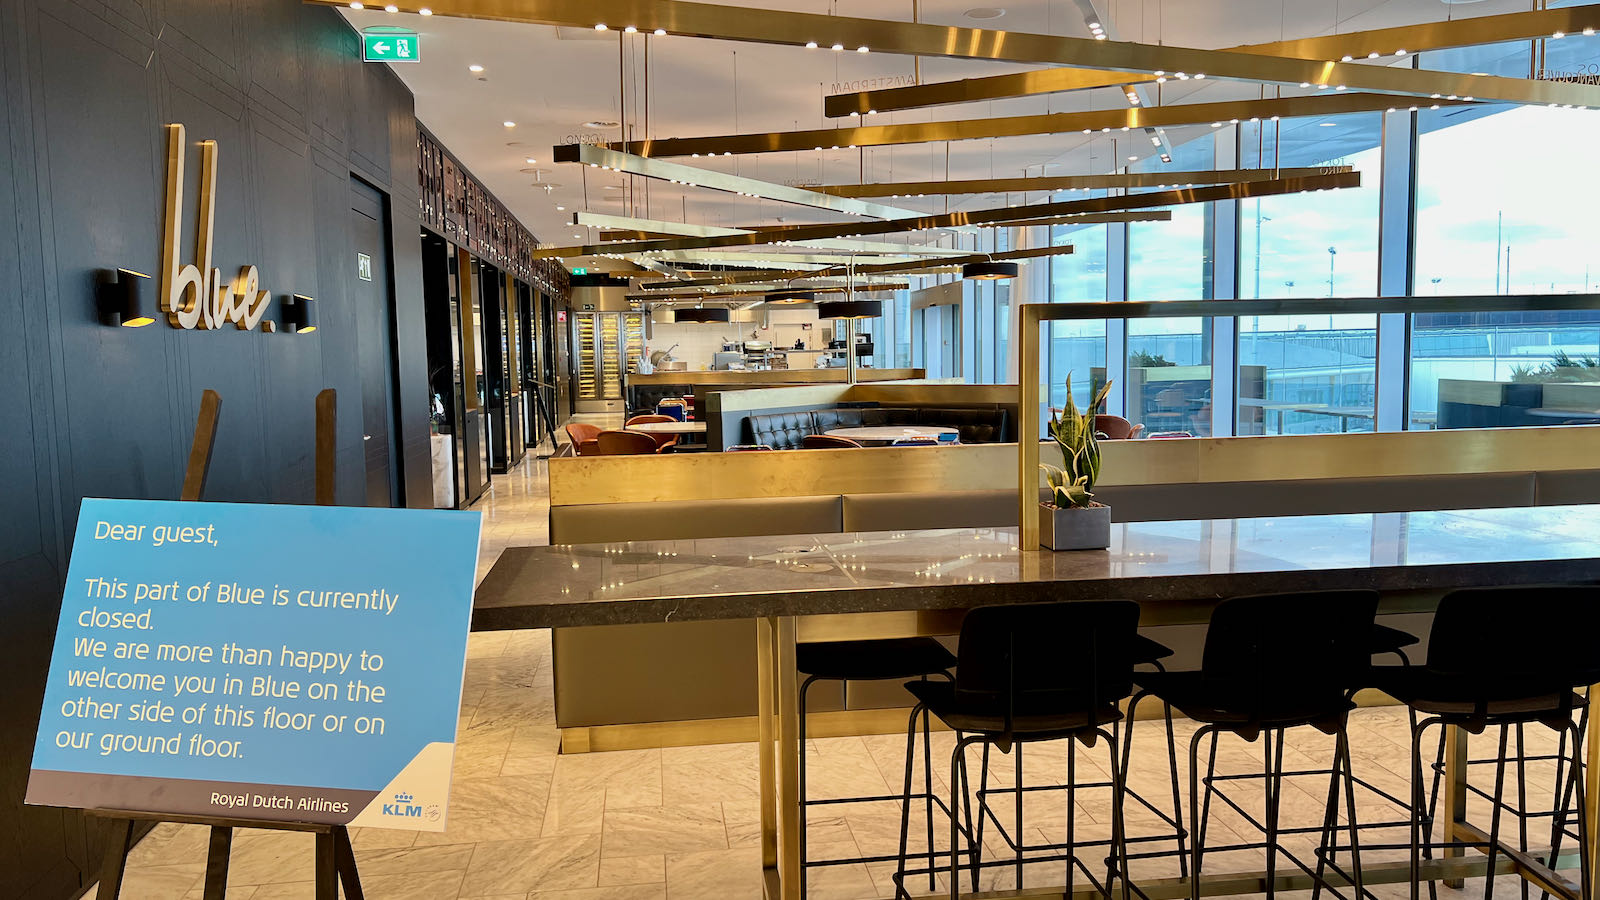 KLM crown lounge Blue restaurant closed March 2022